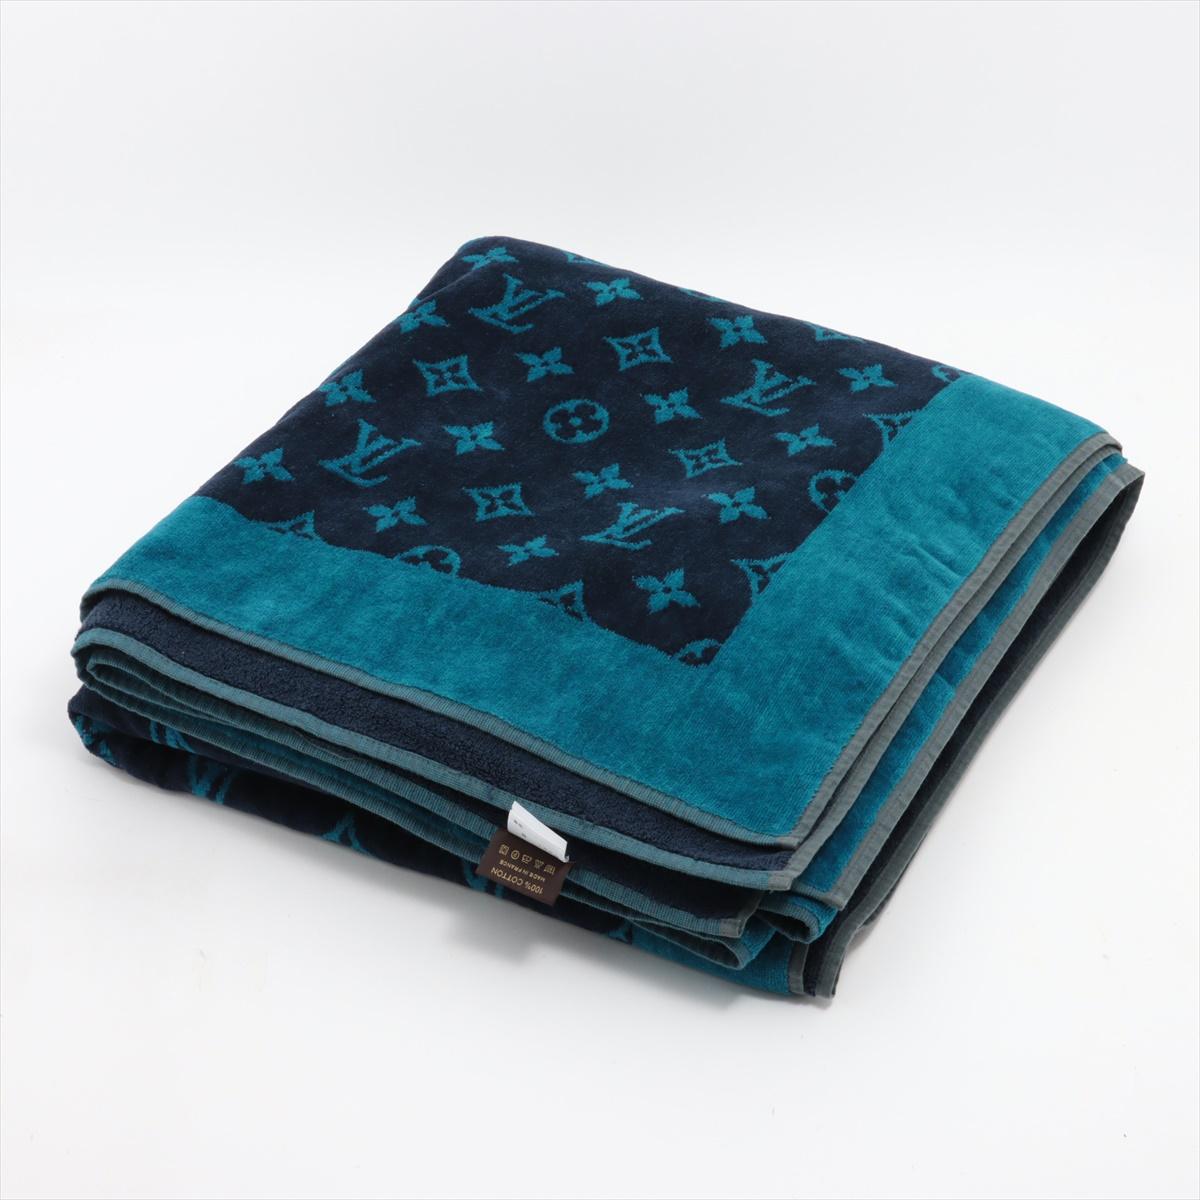 The Louis Vuitton Monogram Cotton Blanket in Navy Blue and Blue Green offers both comfort and style with its luxurious design. Crafted from soft and breathable cotton, the blanket features Louis Vuitton's iconic Monogram pattern on one side,